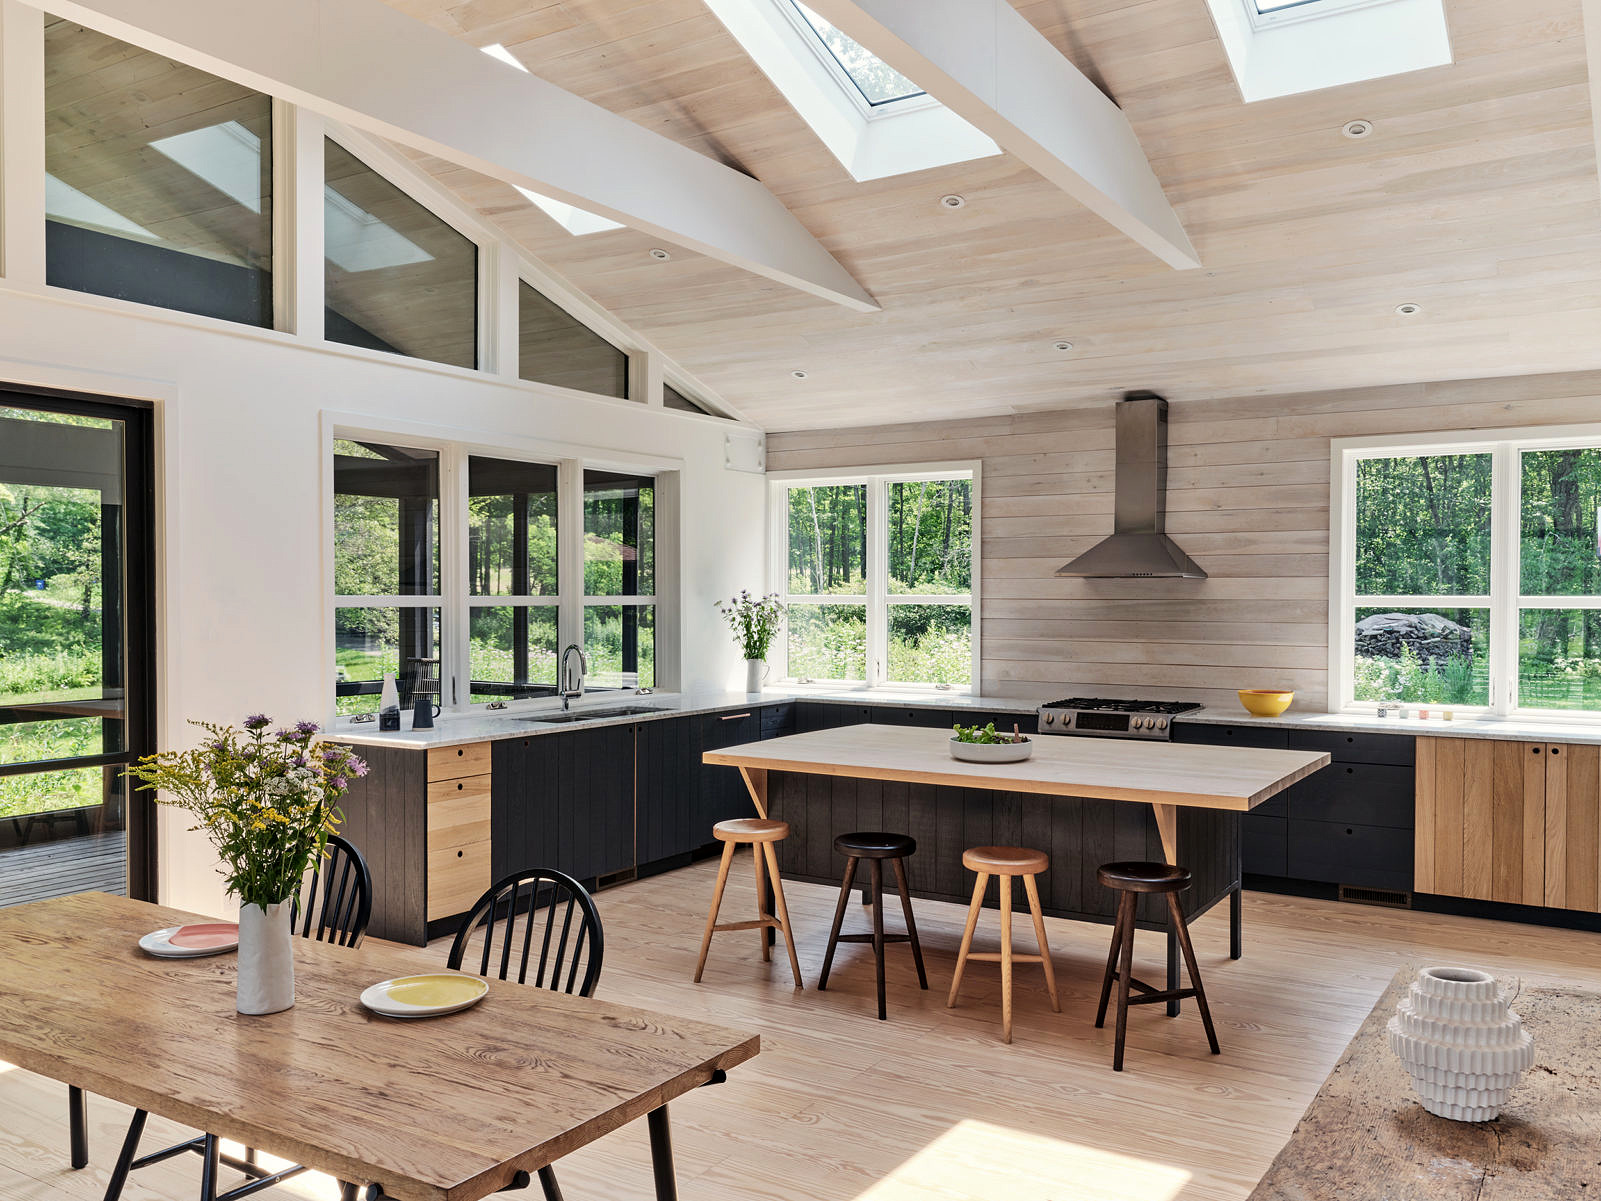 Dining room and kitchen in rustic home addition by connecticut architect sarah jefferys